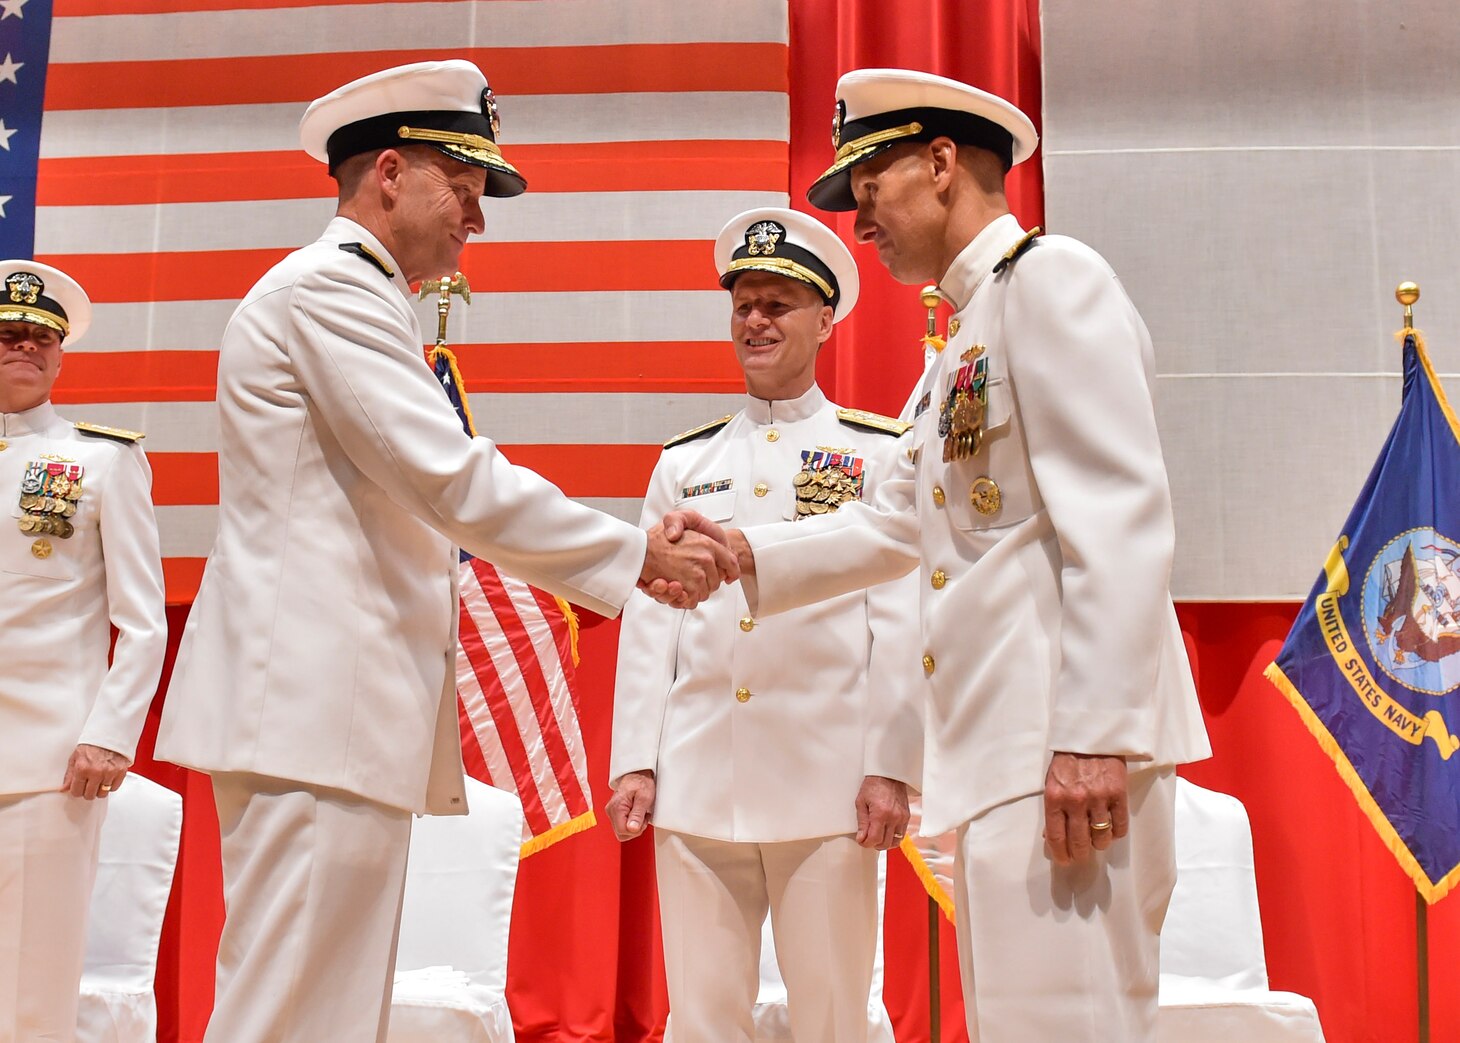 FLEET ACTIVITIES YOKOSUKA, Japan (Aug. 17, 2016) Rear Adm. William R. Merz shakes hands with Rear Adm. Richard A. Correll during a change their command ceremony. Correll relieved Merz as the 45th commander of Submarine Group 7. (U.S. Navy photo by Mass Communication Specialist 2nd Class Brian G. Reynolds)
